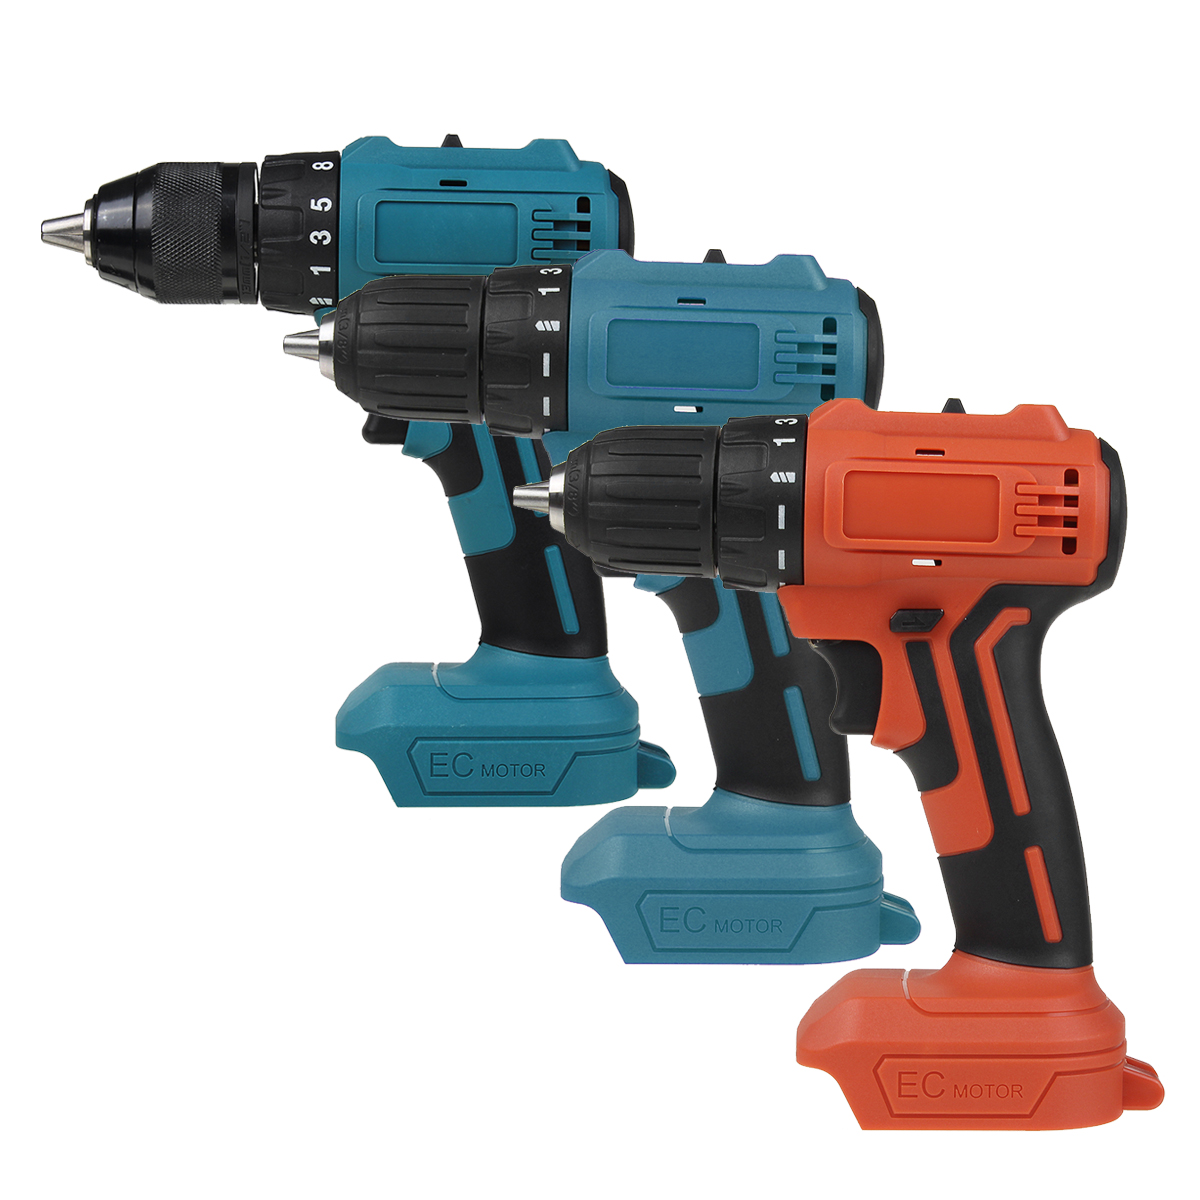 Dual-Speed-Brushless-Electric-Drill-1013mm-Chuck-Rechargeable-Electric-Screwdriver-for-Makita-18V-Ba-1758443-15